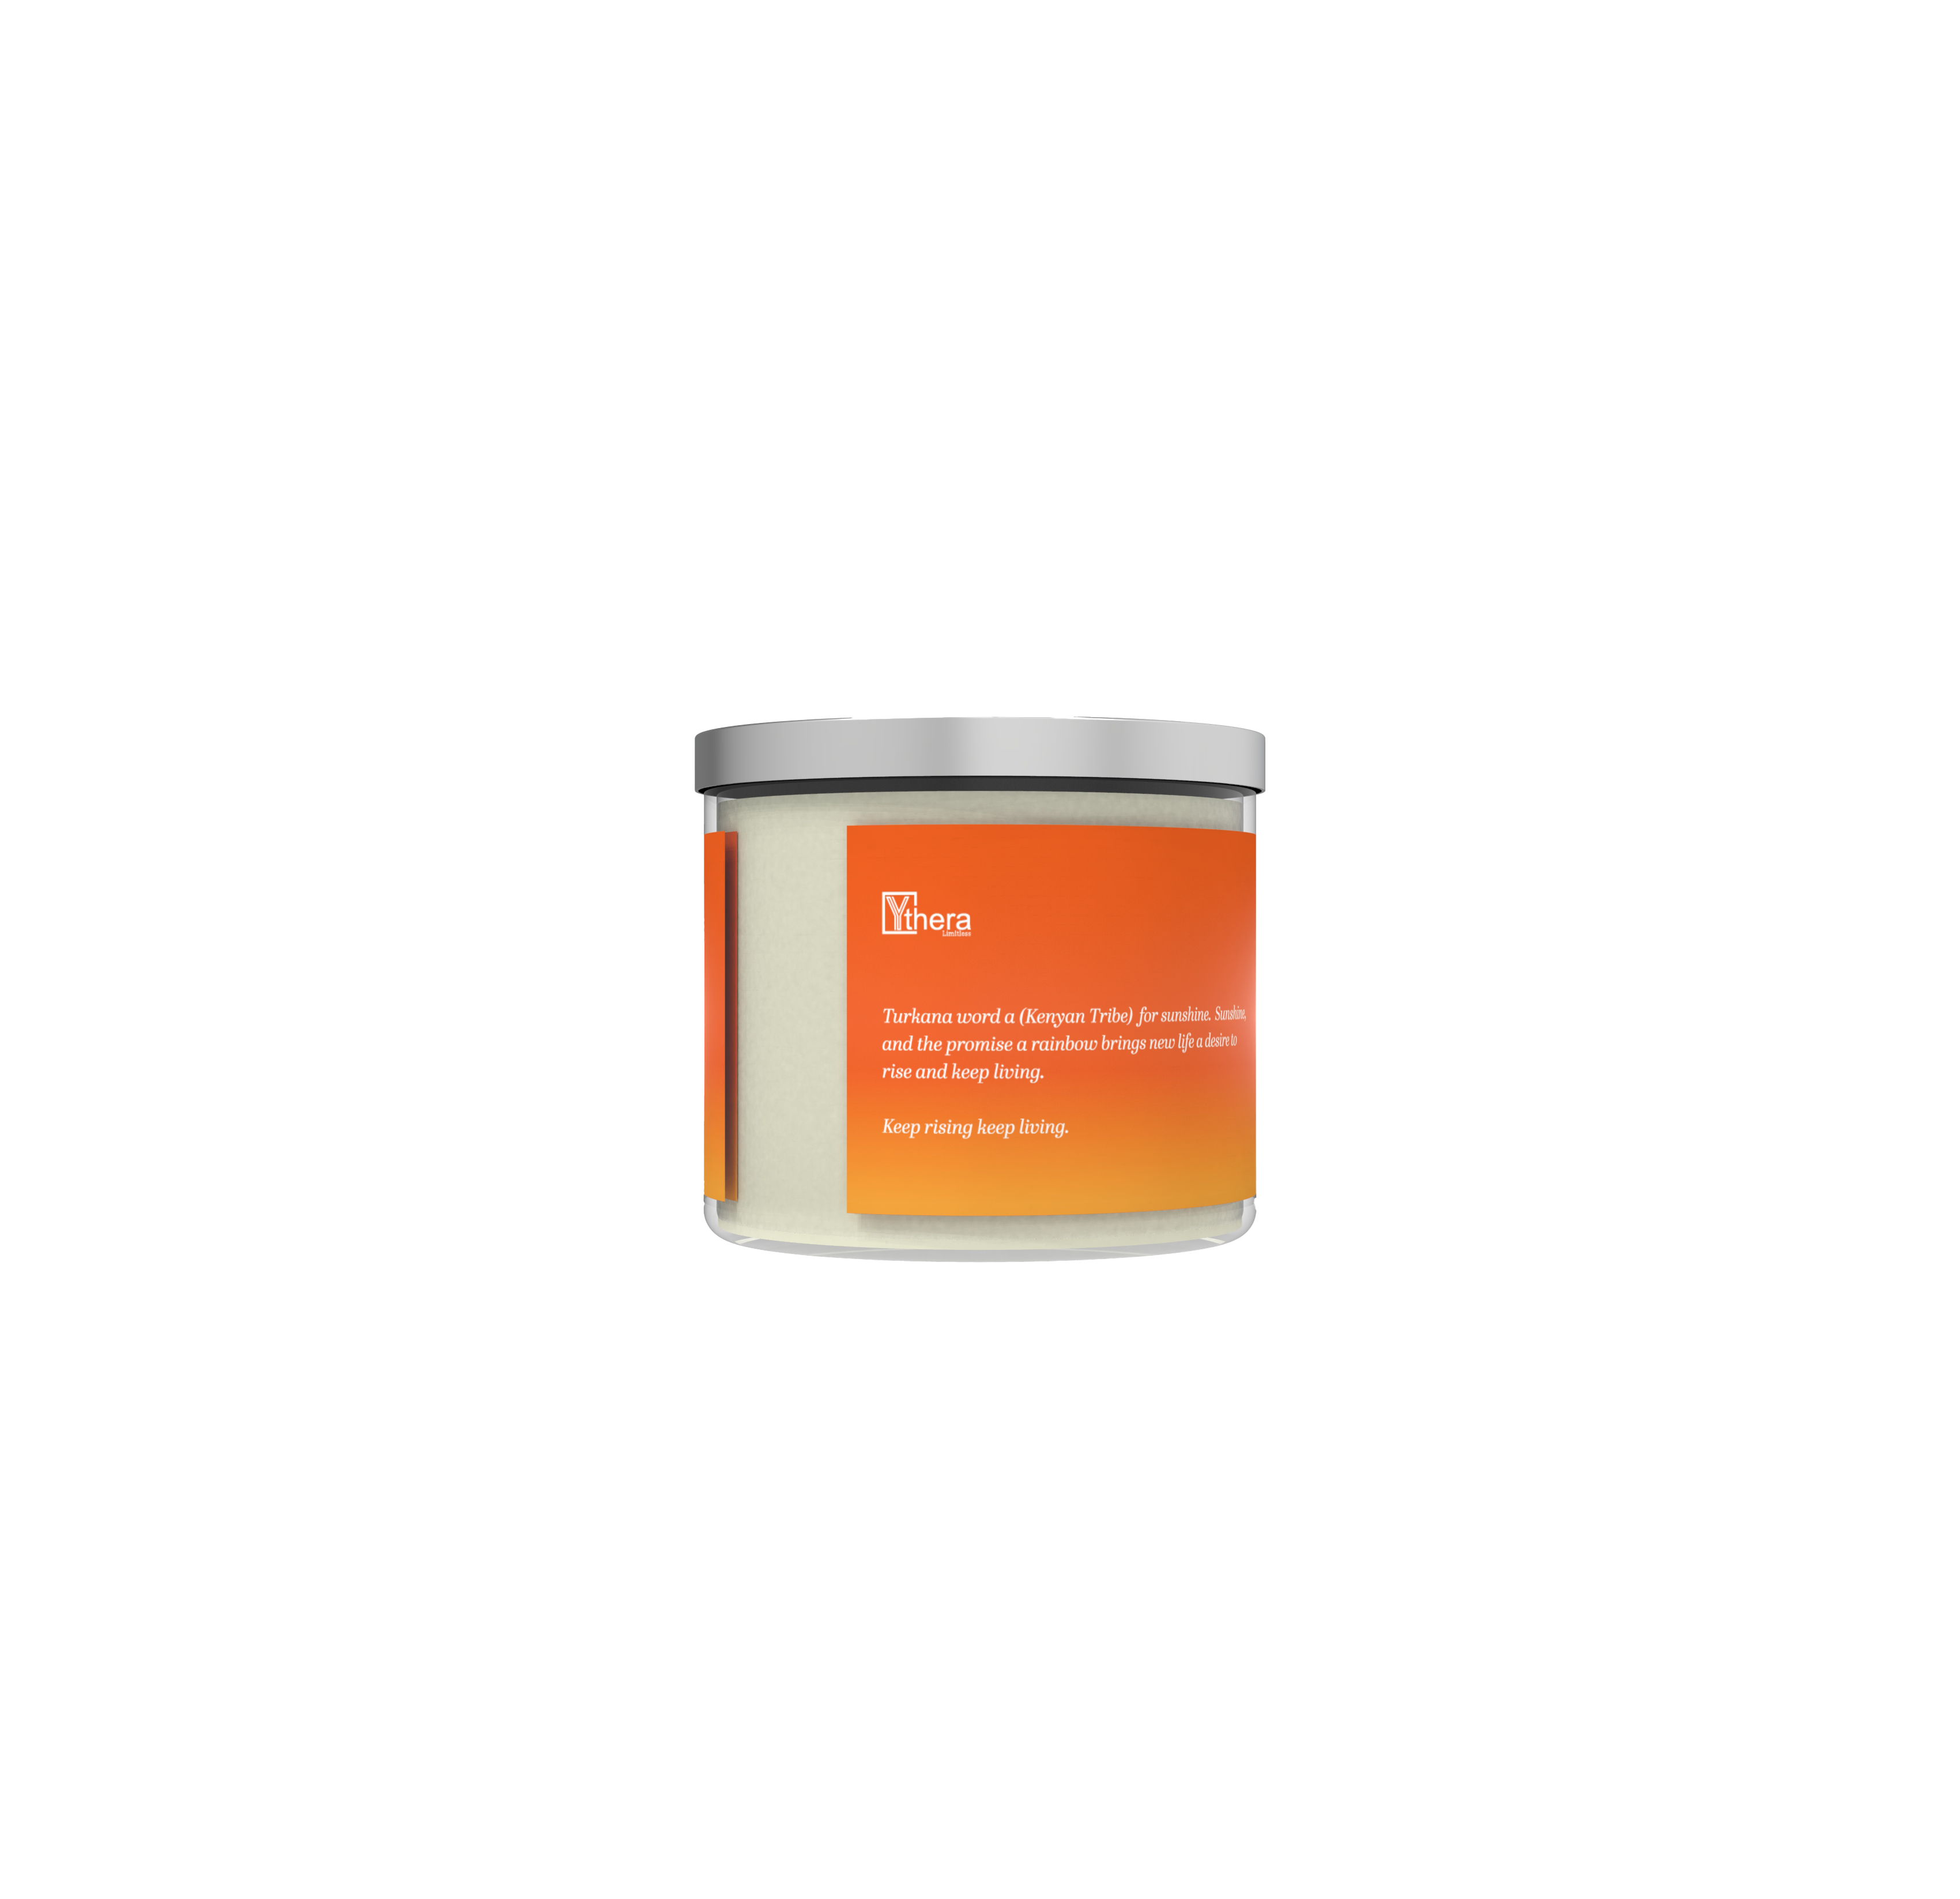 Okolong "Sun Kissed" 3-Wick Candle